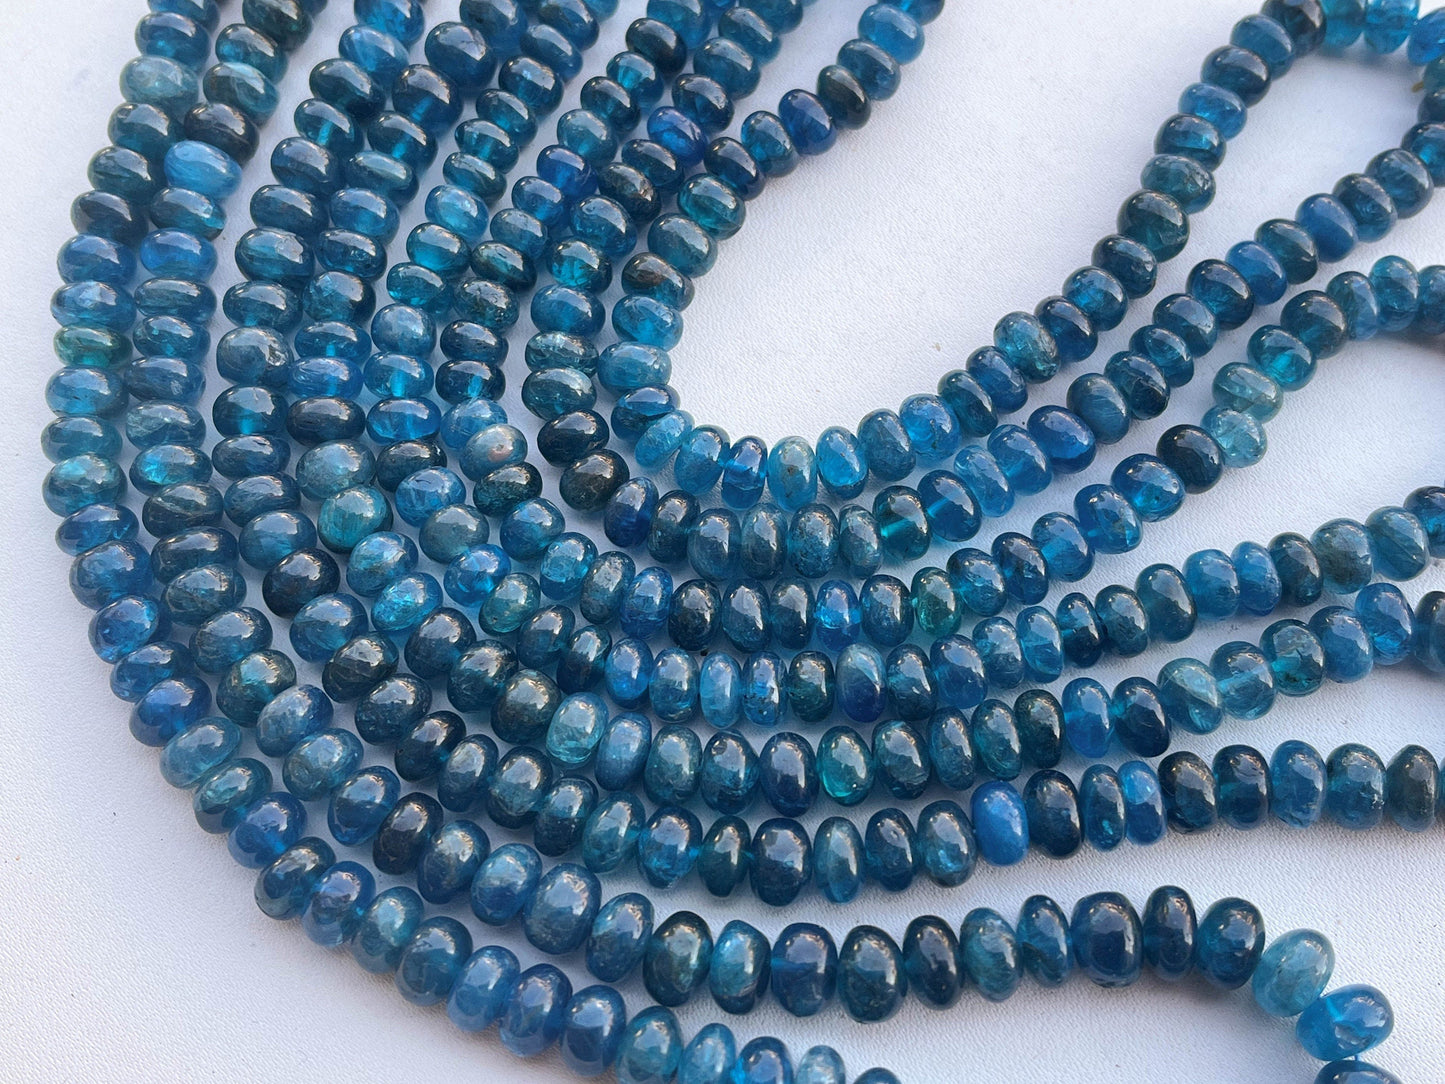 16 Inch Neon Blue Apatite Smooth Rondelle Shape Beads, Apatite Beads, Apatite Rondelle, Apatite Smooth Beads, 5 / 6 / 6.50 / 7.50 / 8mm Beadsforyourjewelry